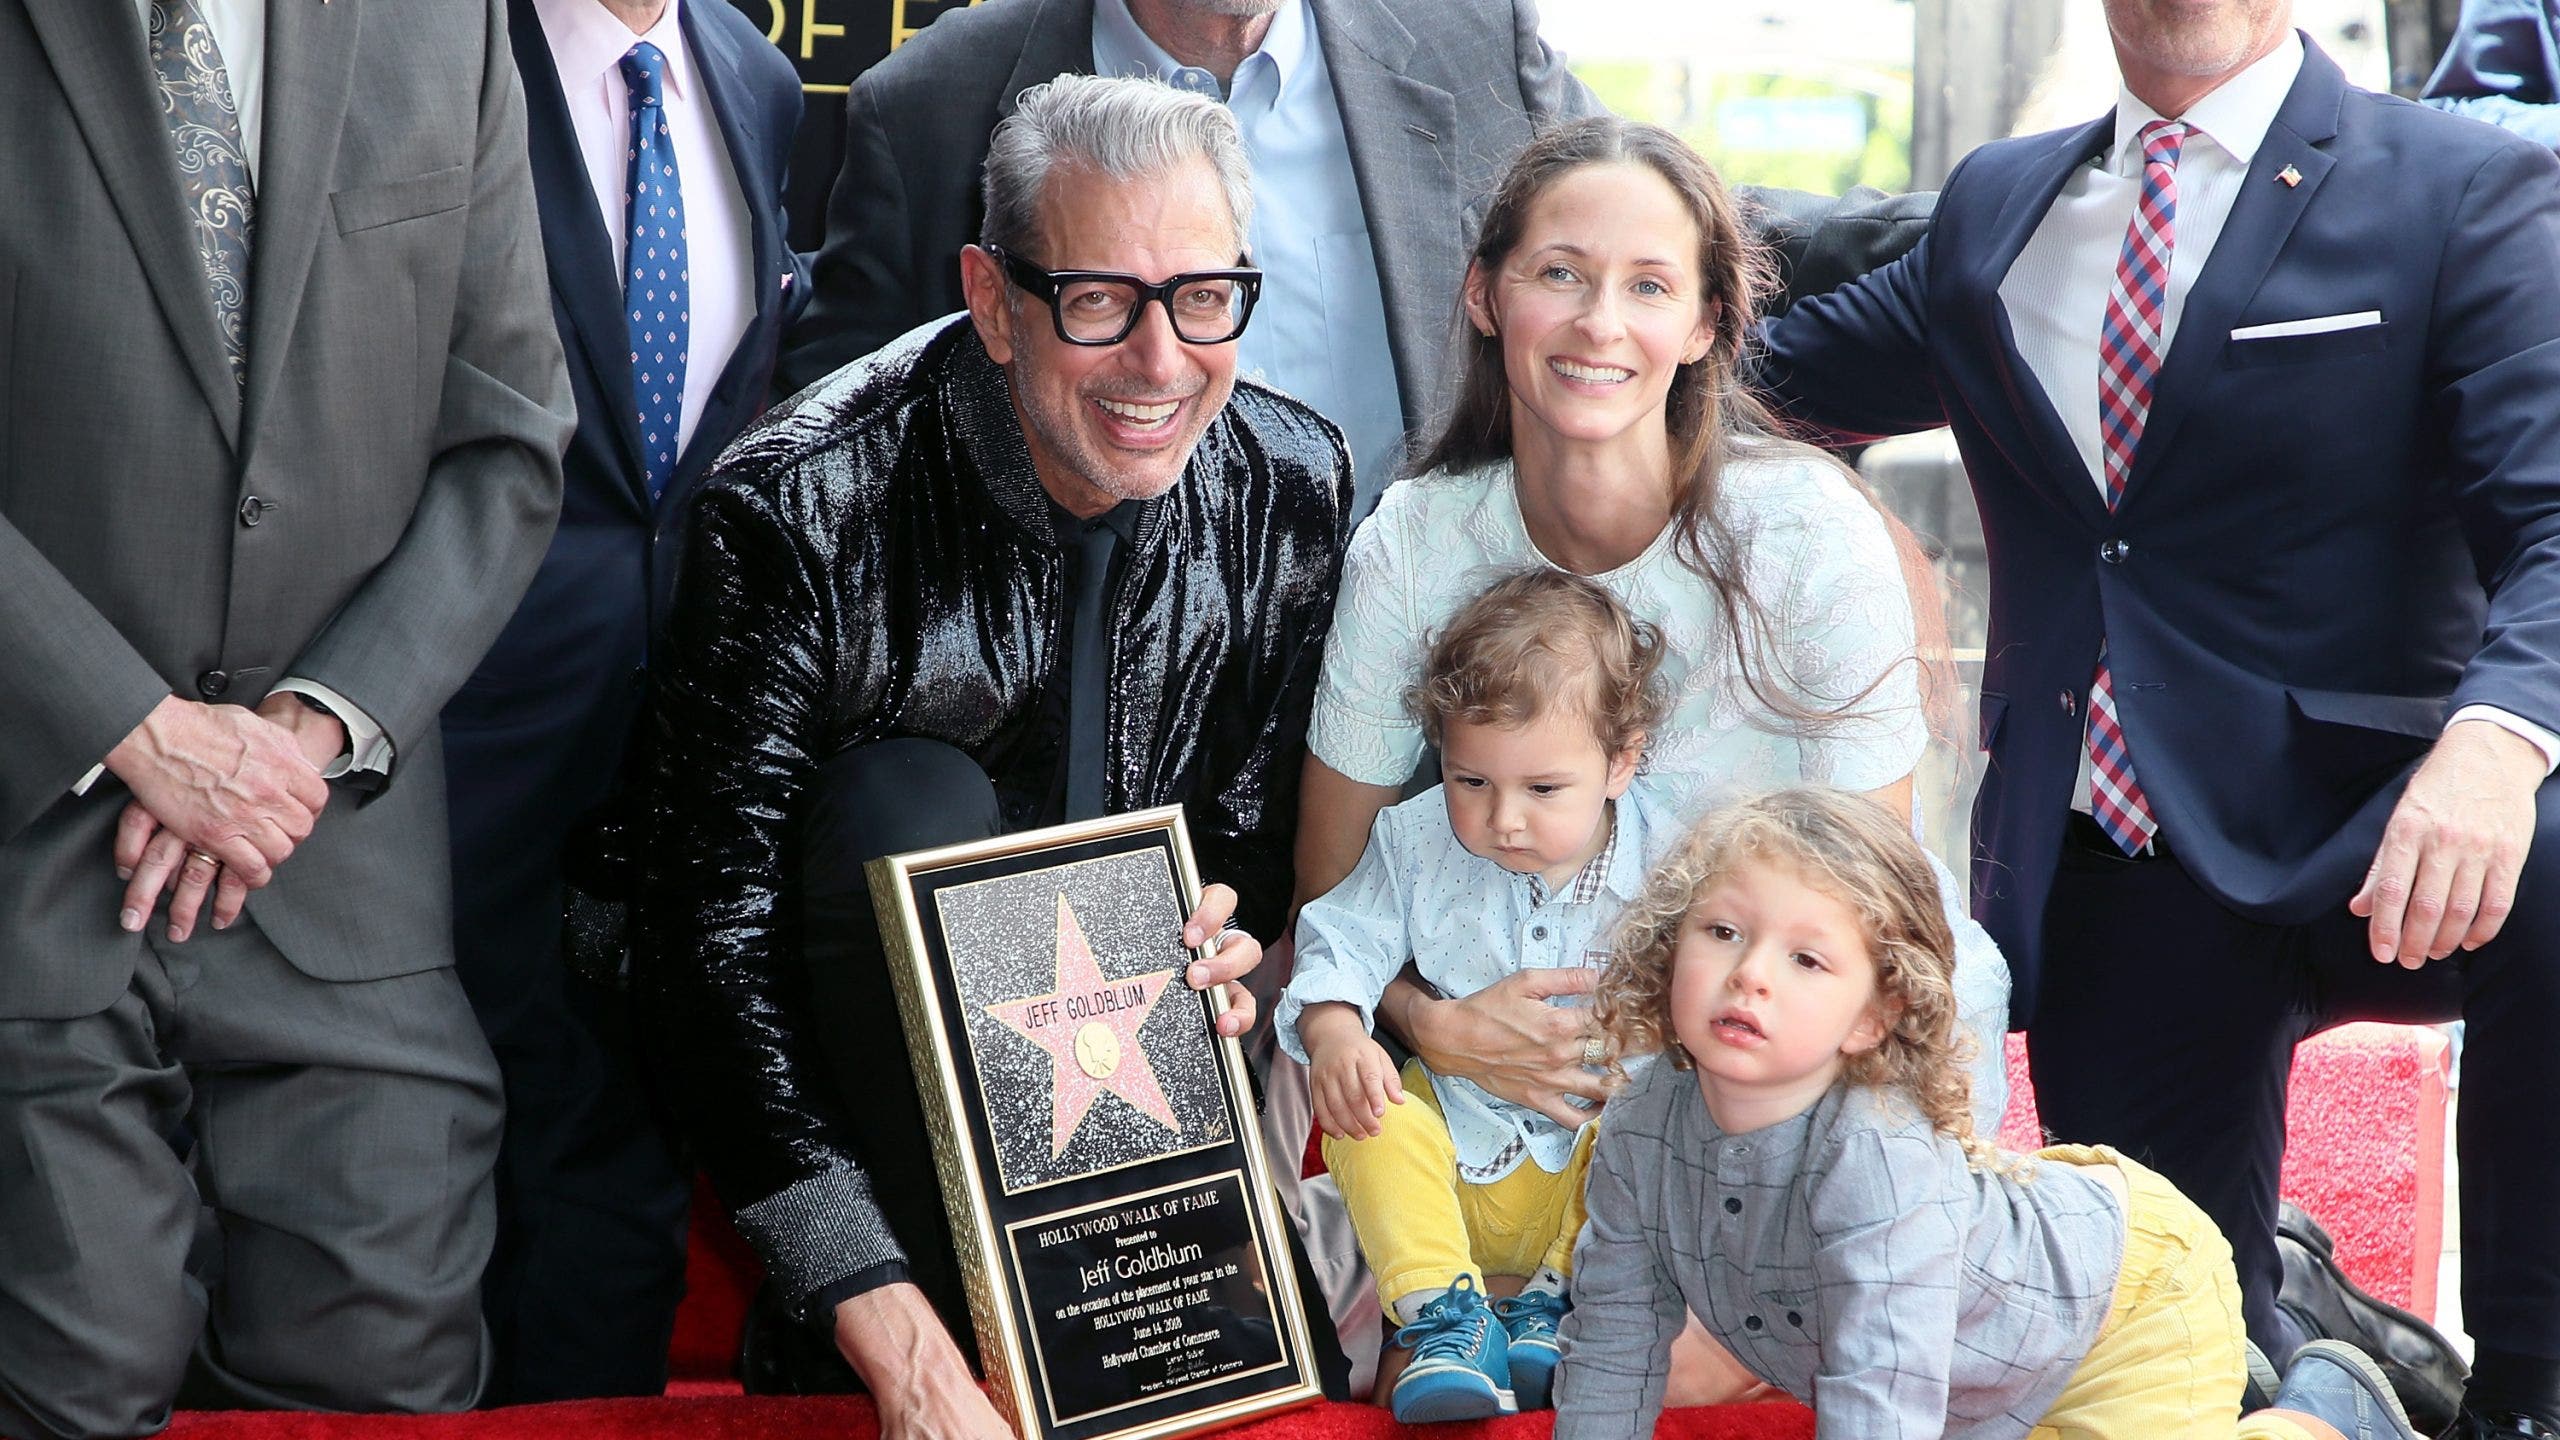 Jeff Goldblum says it's 'important' for his young children to learn independence: 'Row your own boat'